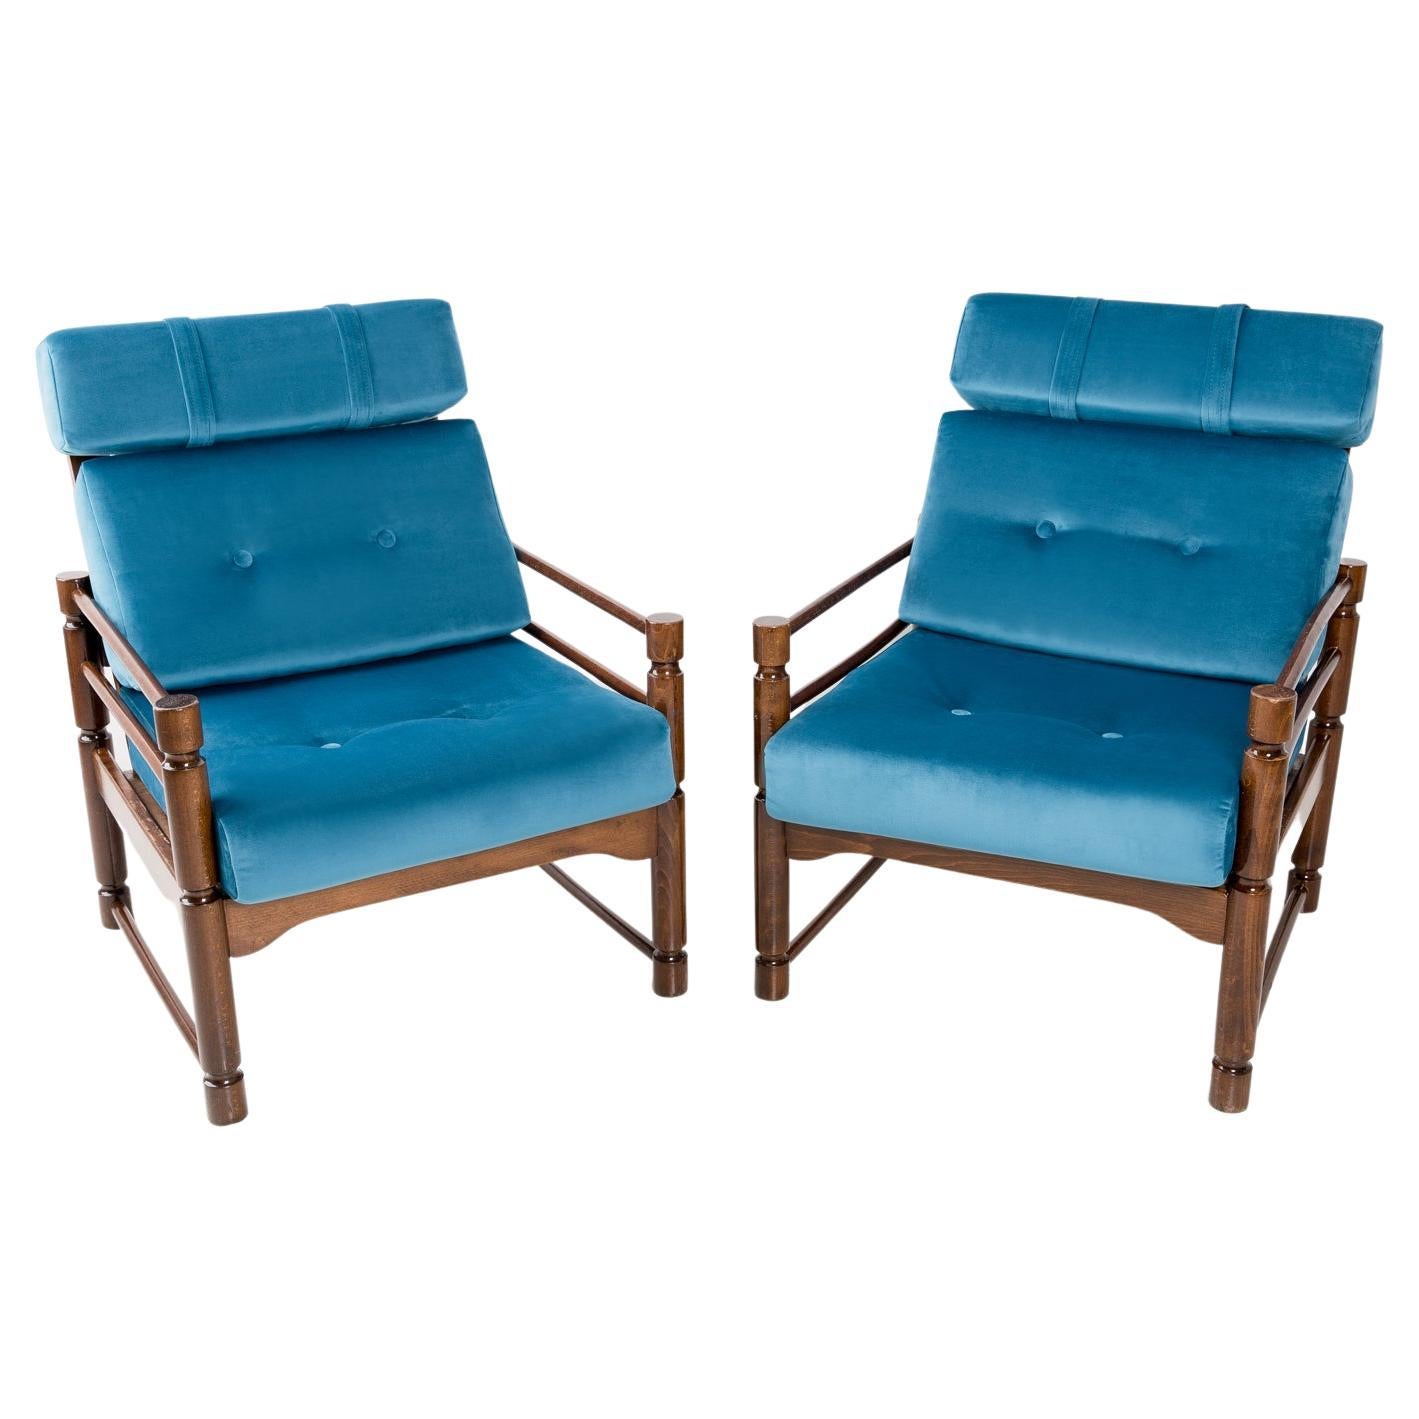 Pair of Petrol Blue Armchairs, 20th Century, Beech Wood, Poland For Sale